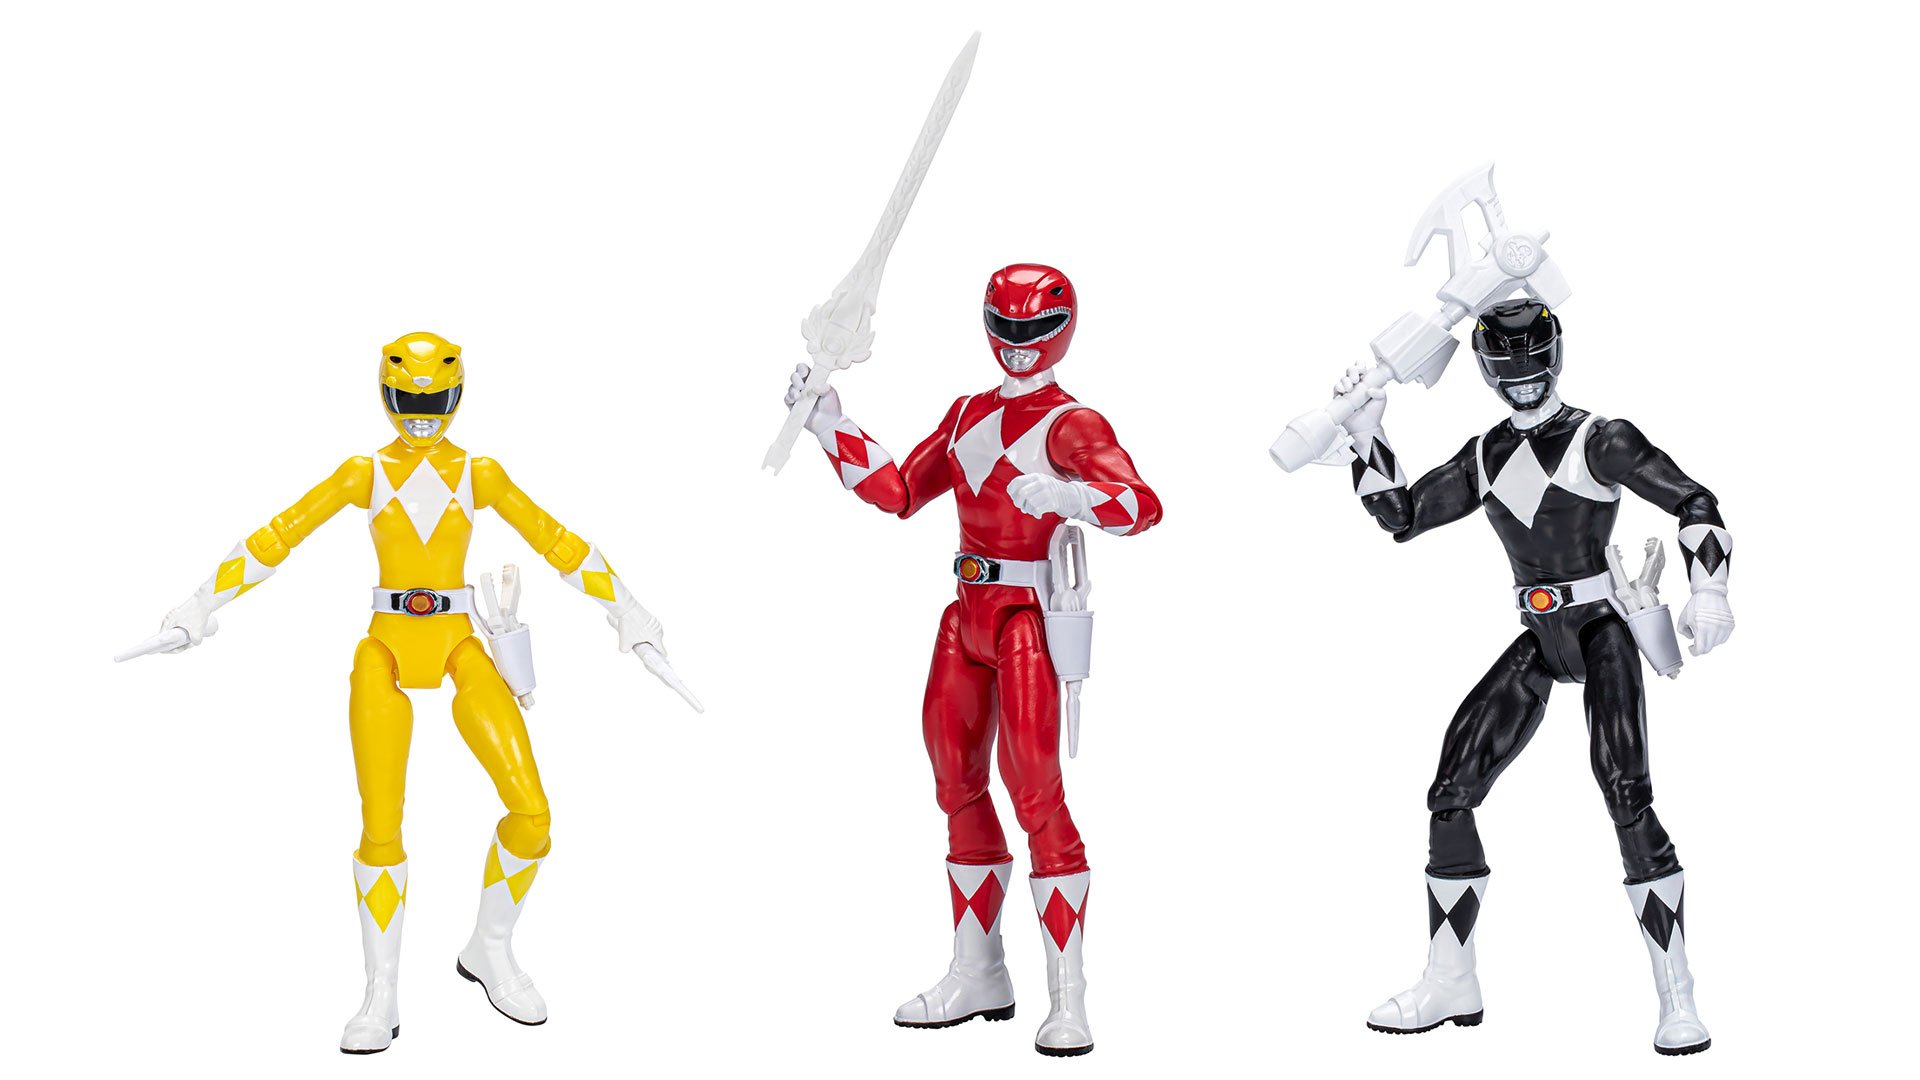 New MIGHTY MORPHIN POWER RANGERS Figures Release as Walmart Collector Con Exclusives